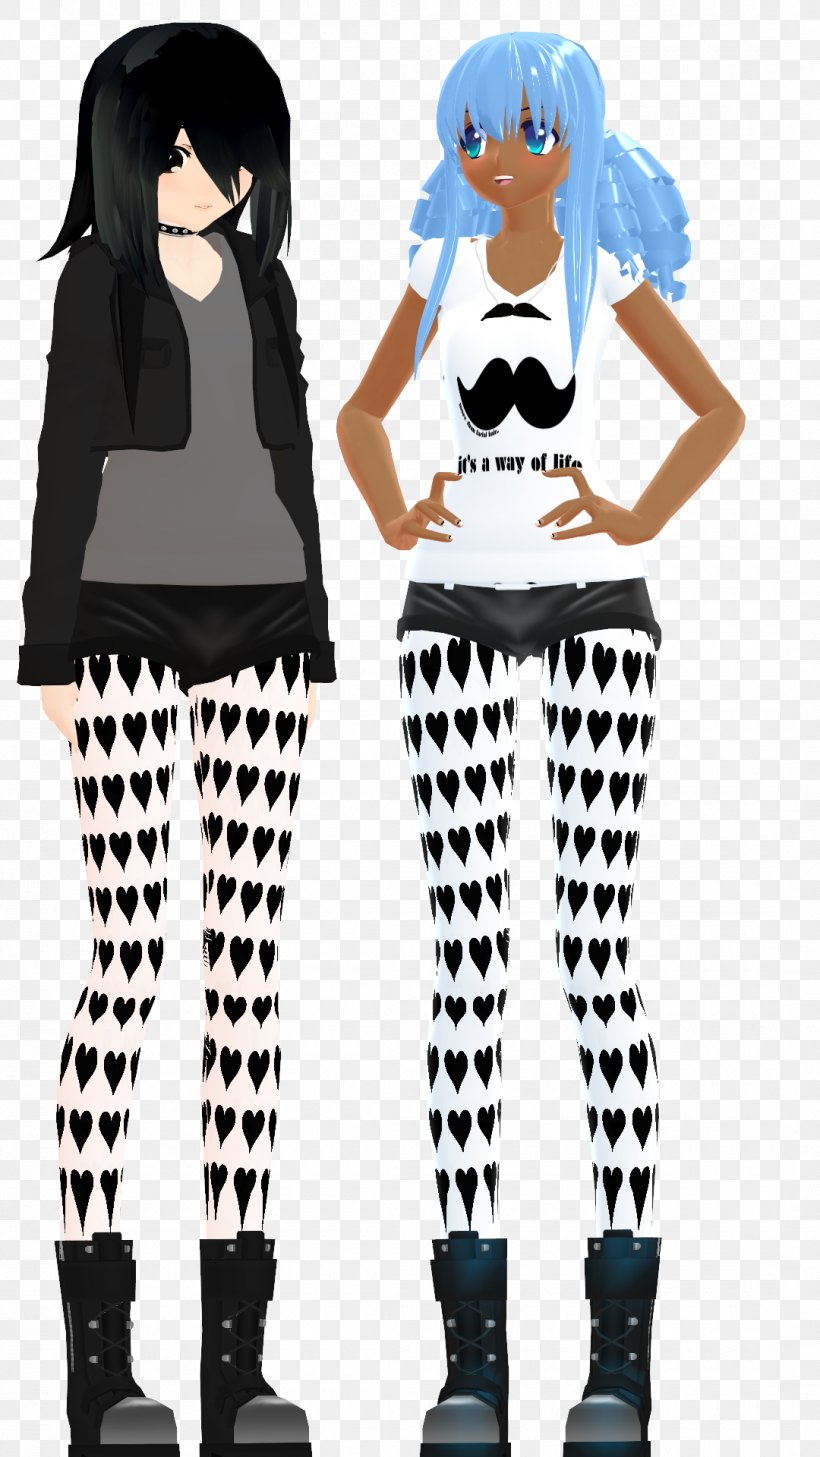 Leggings Shoe Joint Costume Animated Cartoon, PNG, 1080x1920px, Leggings, Animated Cartoon, Clothing, Costume, Joint Download Free